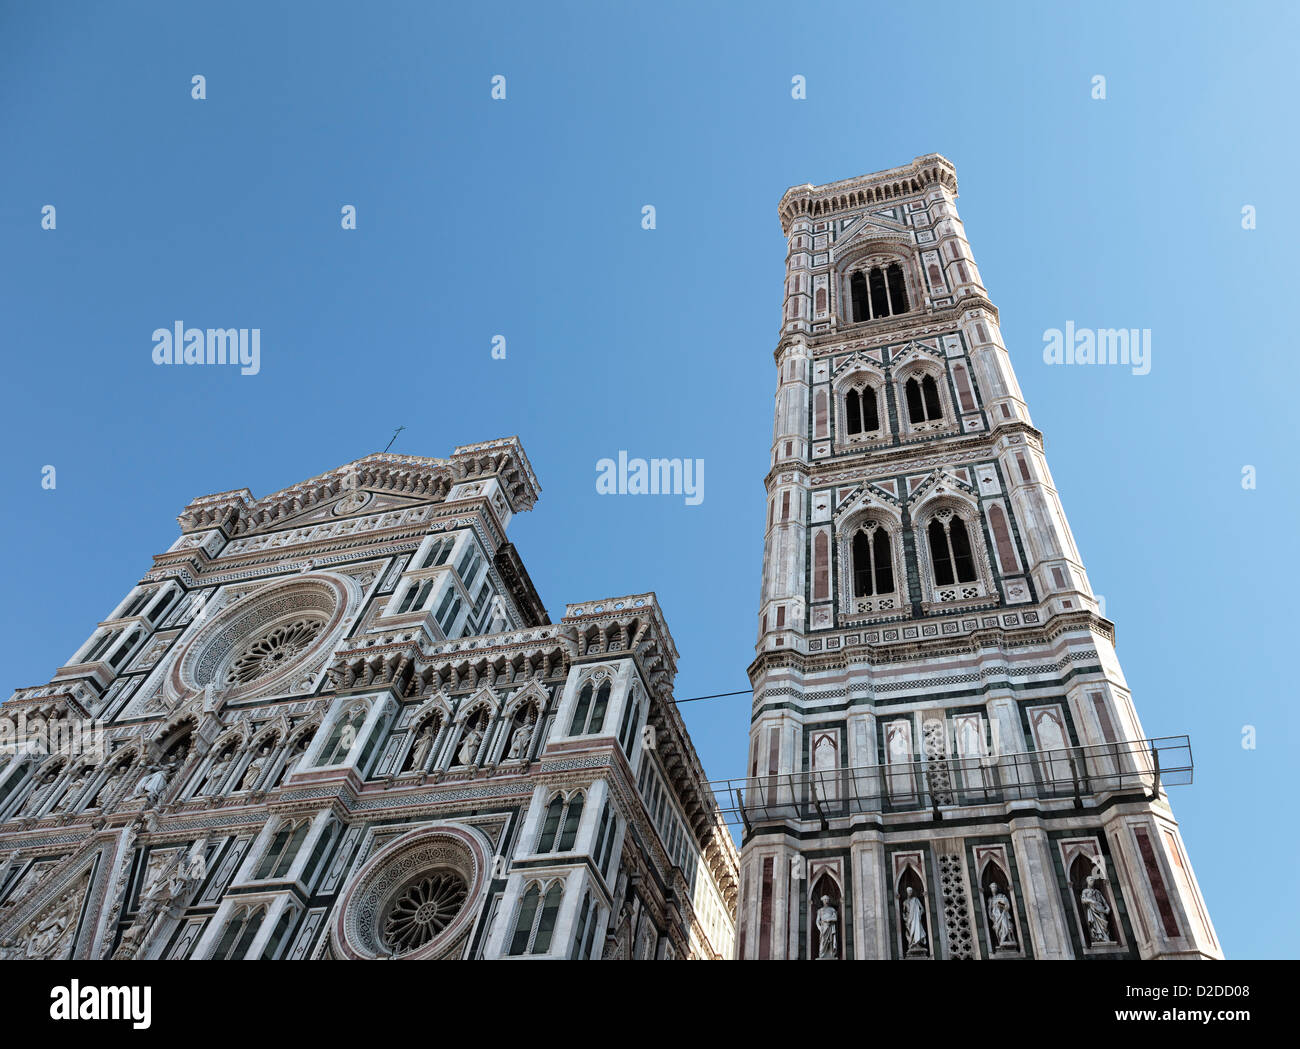 Duomo and Giotto's bell tower, Florence Stock Photo